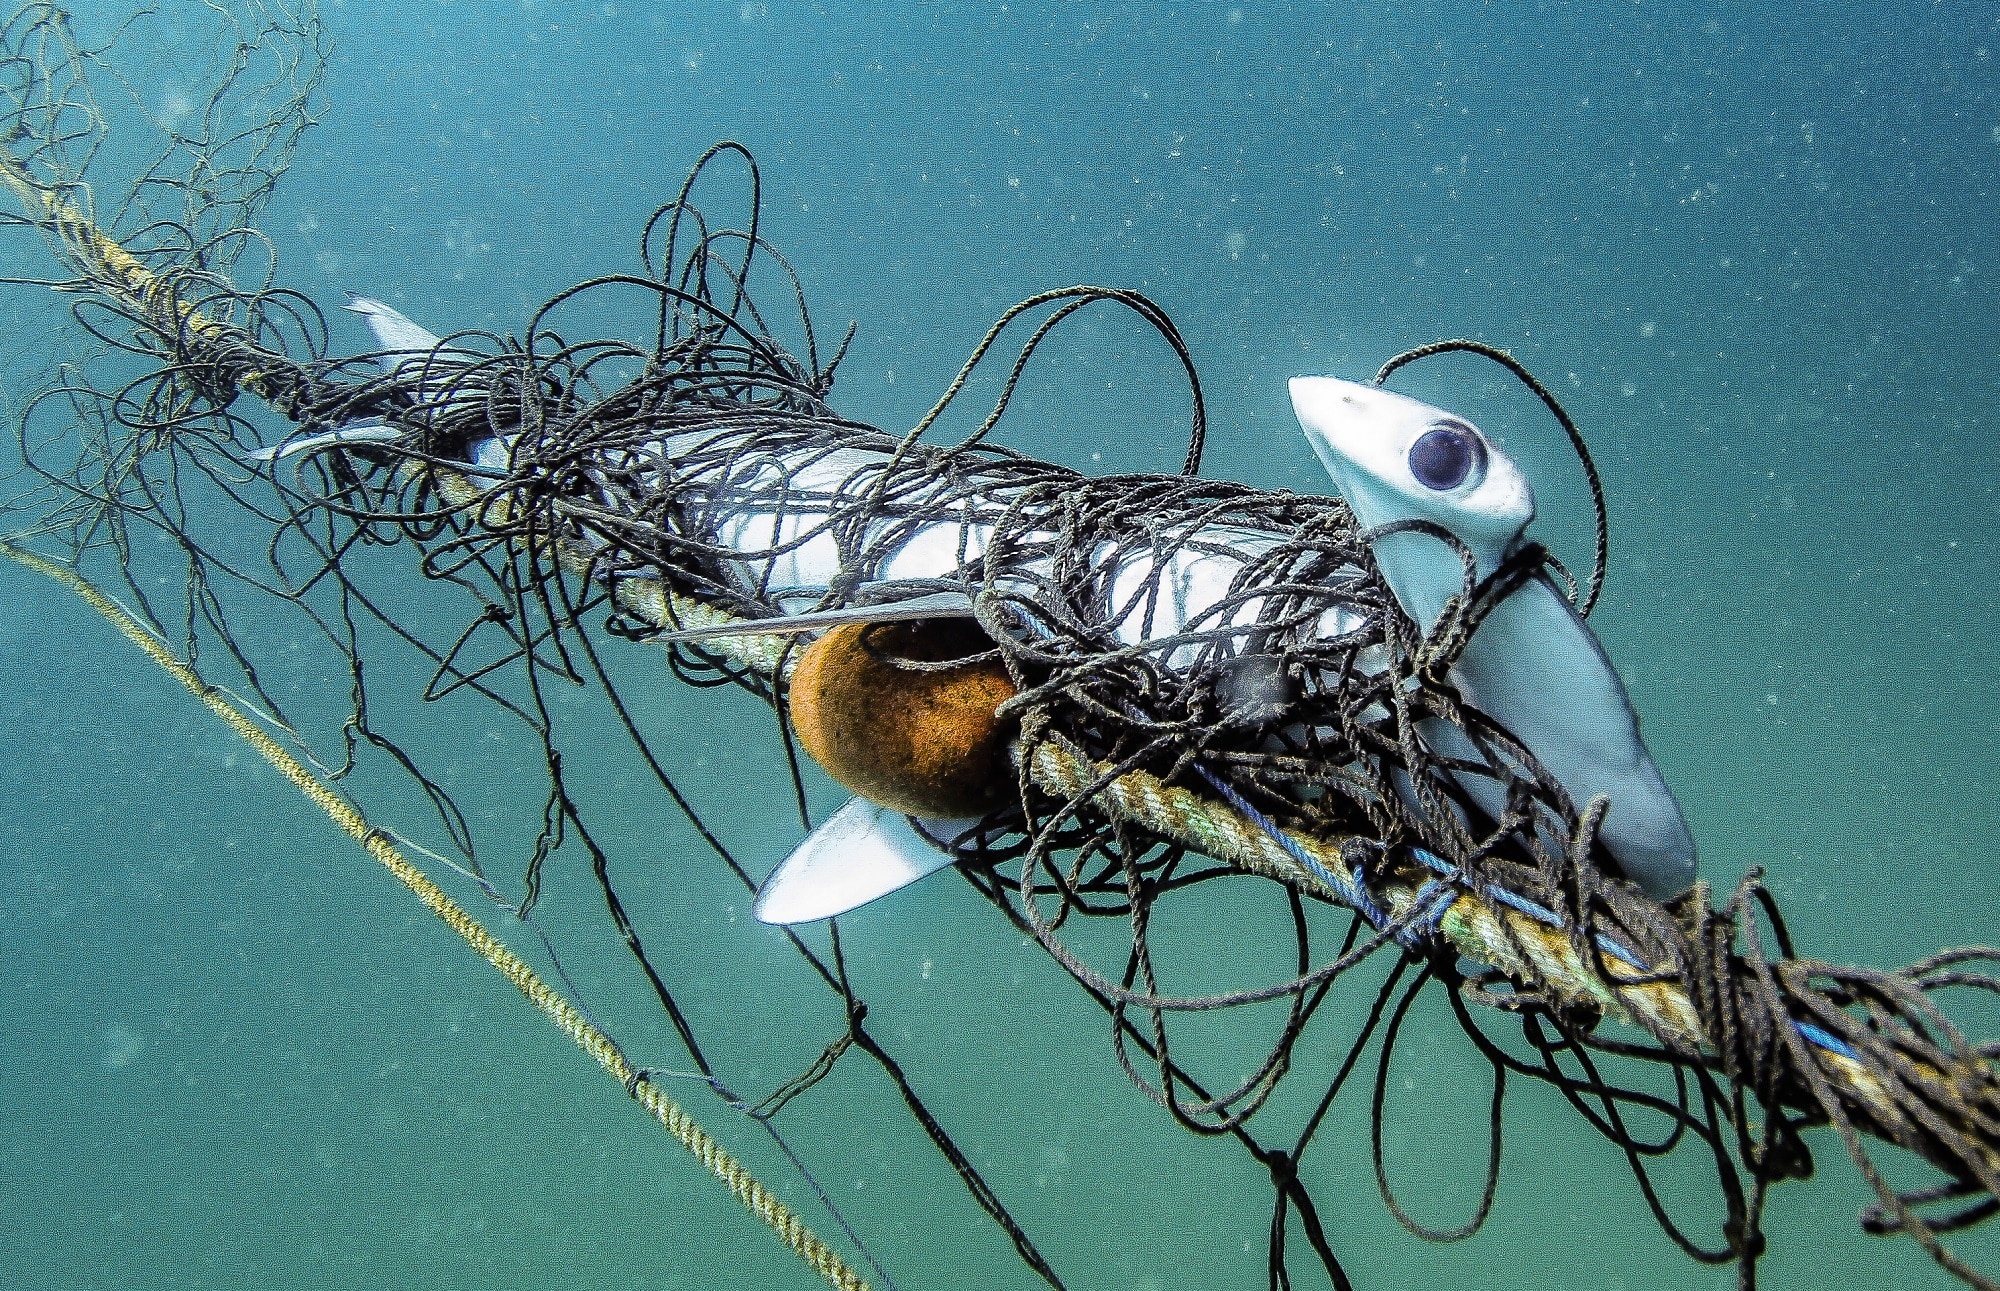 Over 150 threatened and protected wildlife caught in NSW shark nets in the last year, with majority killed, new data reveals